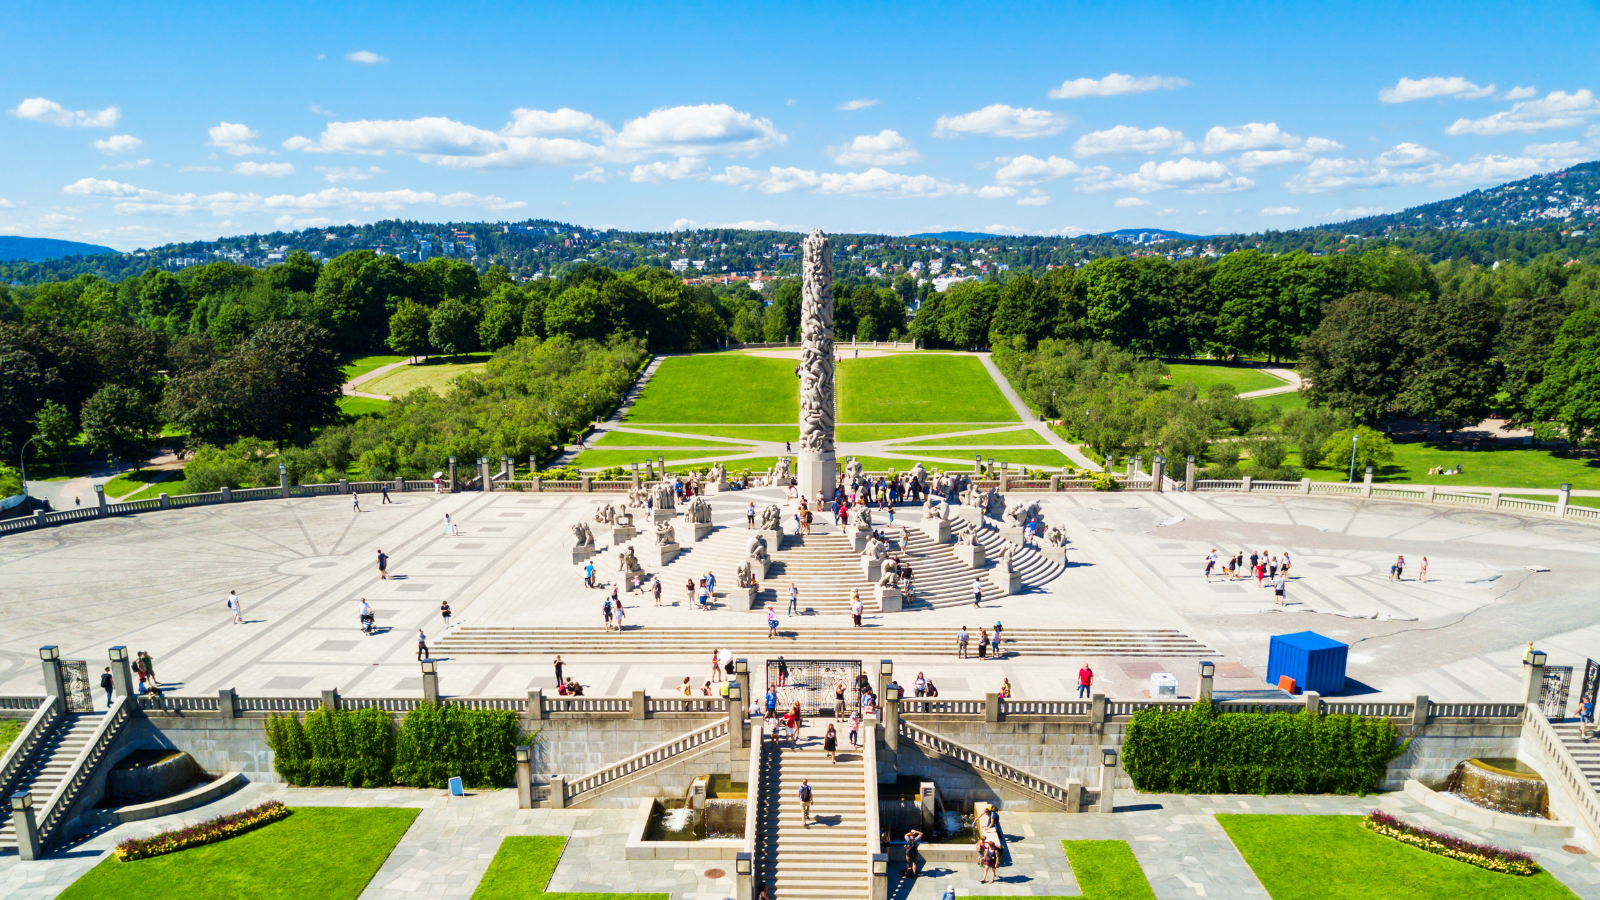 The second thing in the list of 10 best things to do in Norway - Have a look at the intricate sculptures in Vigelandsparken